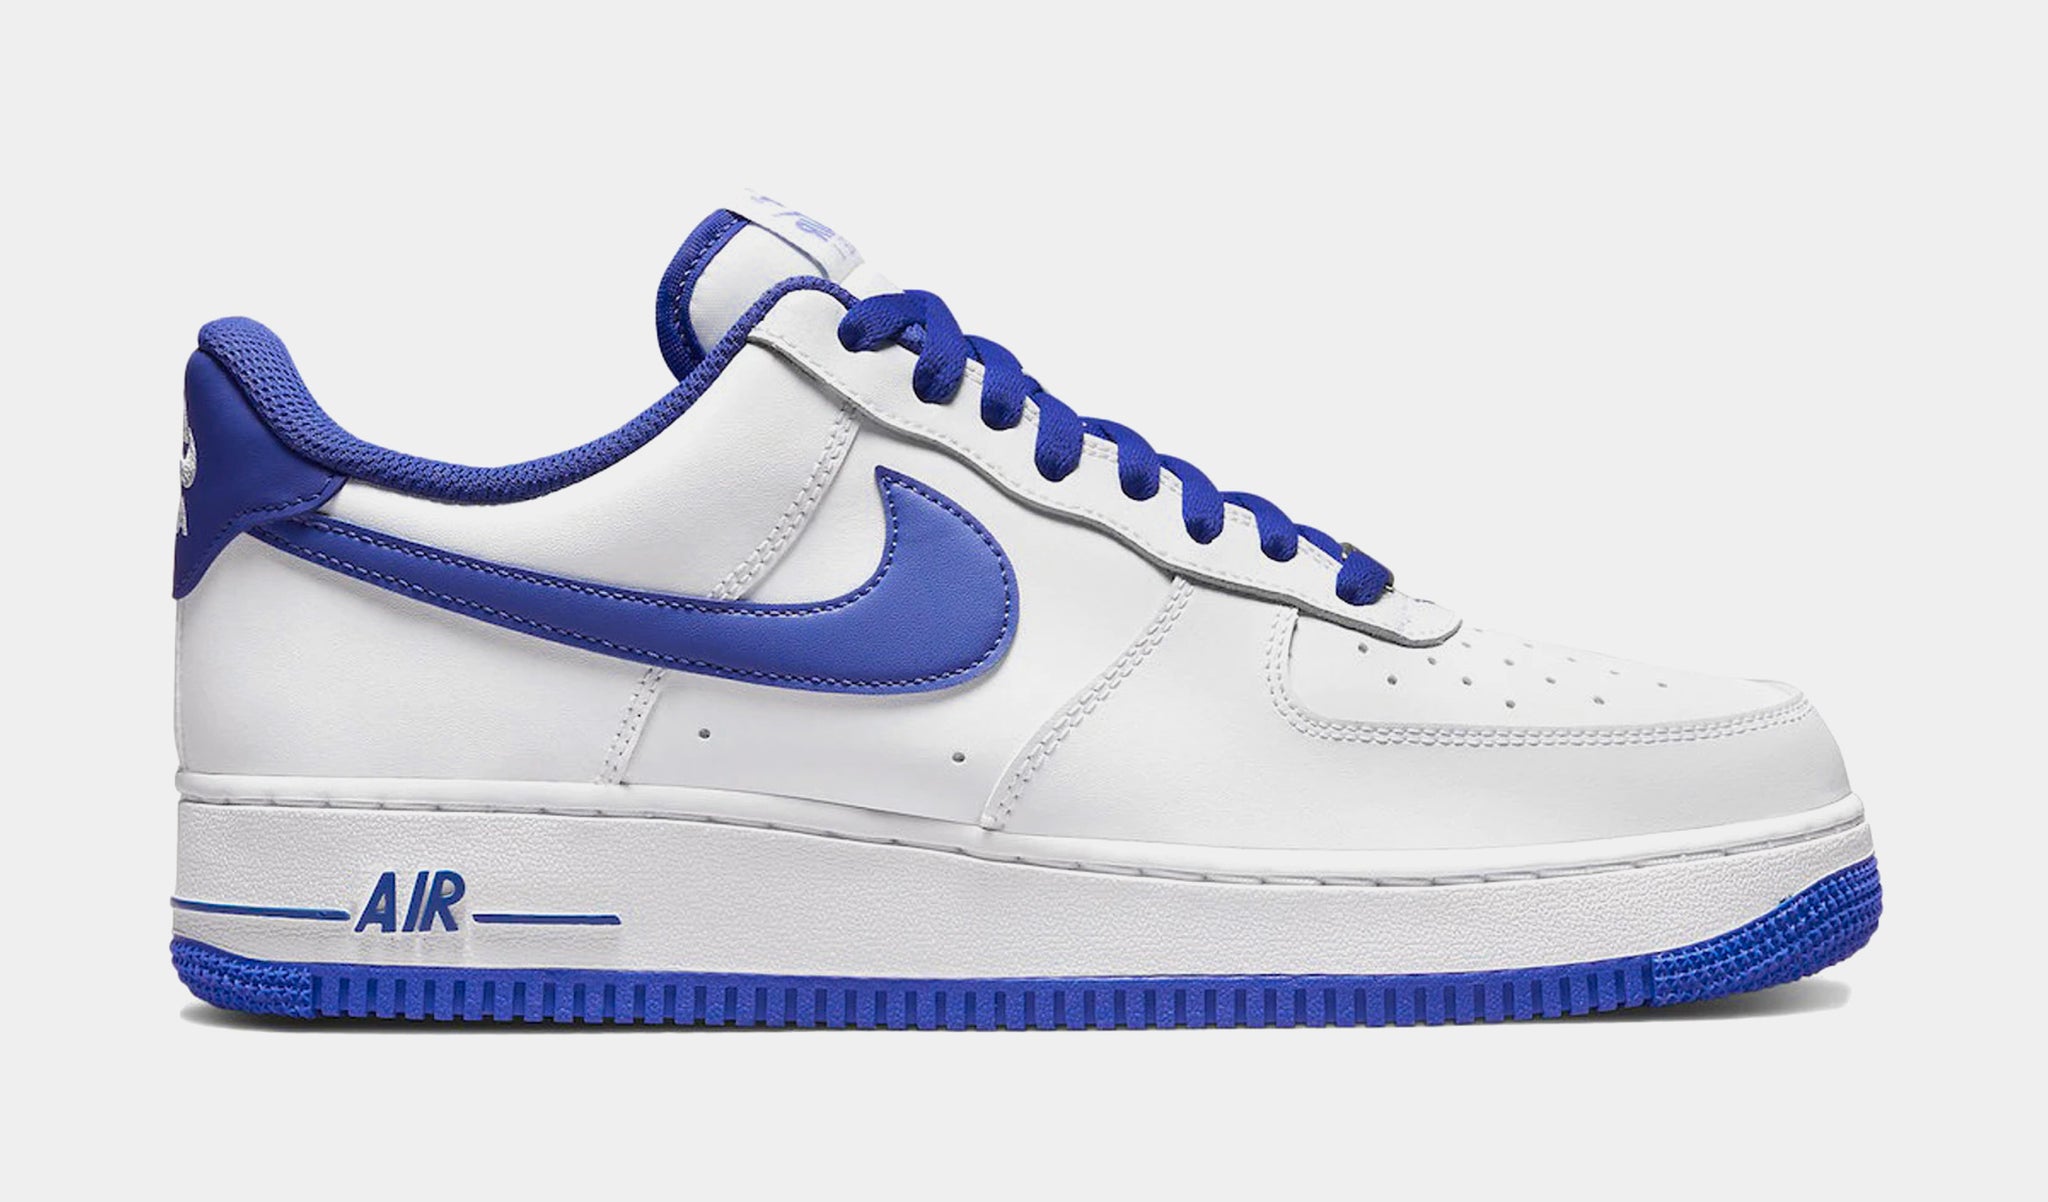 Air Force 1 07 Mens Lifestyle Shoes (White/Blue)